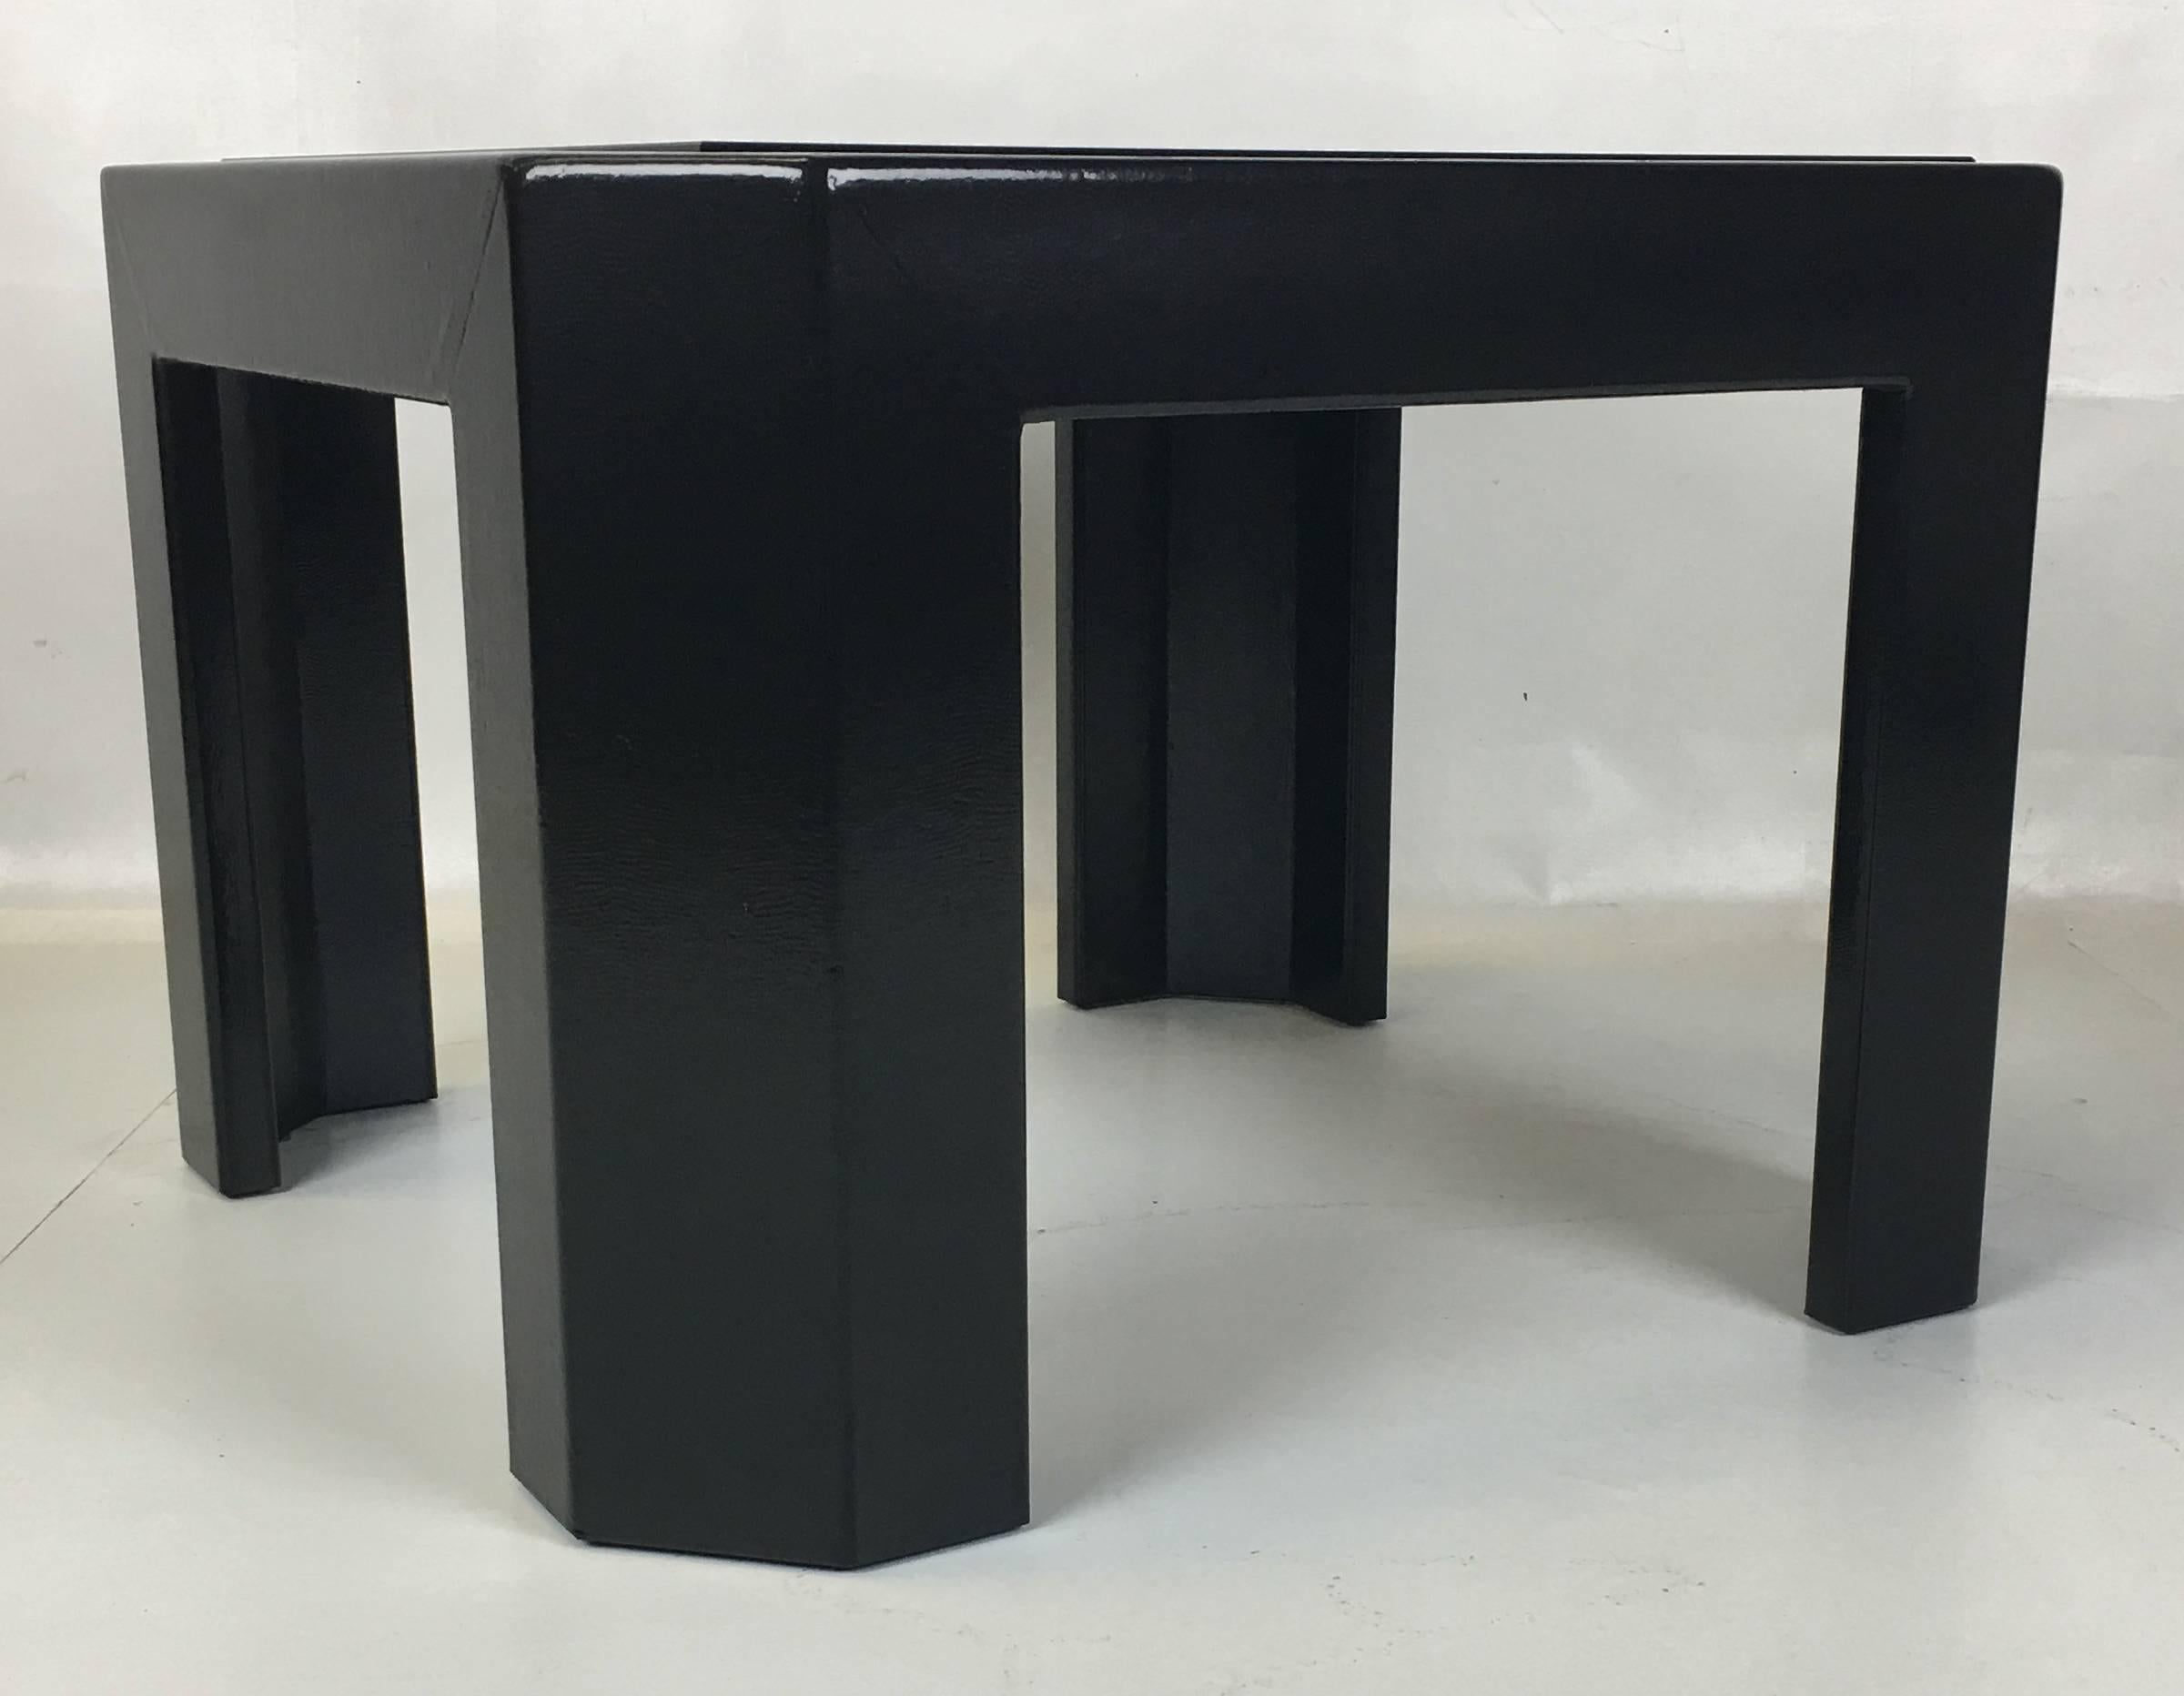 Beautifully crafted black lacquered snakeskin side table with cut corners and inset smoked glass by Ron Seff.